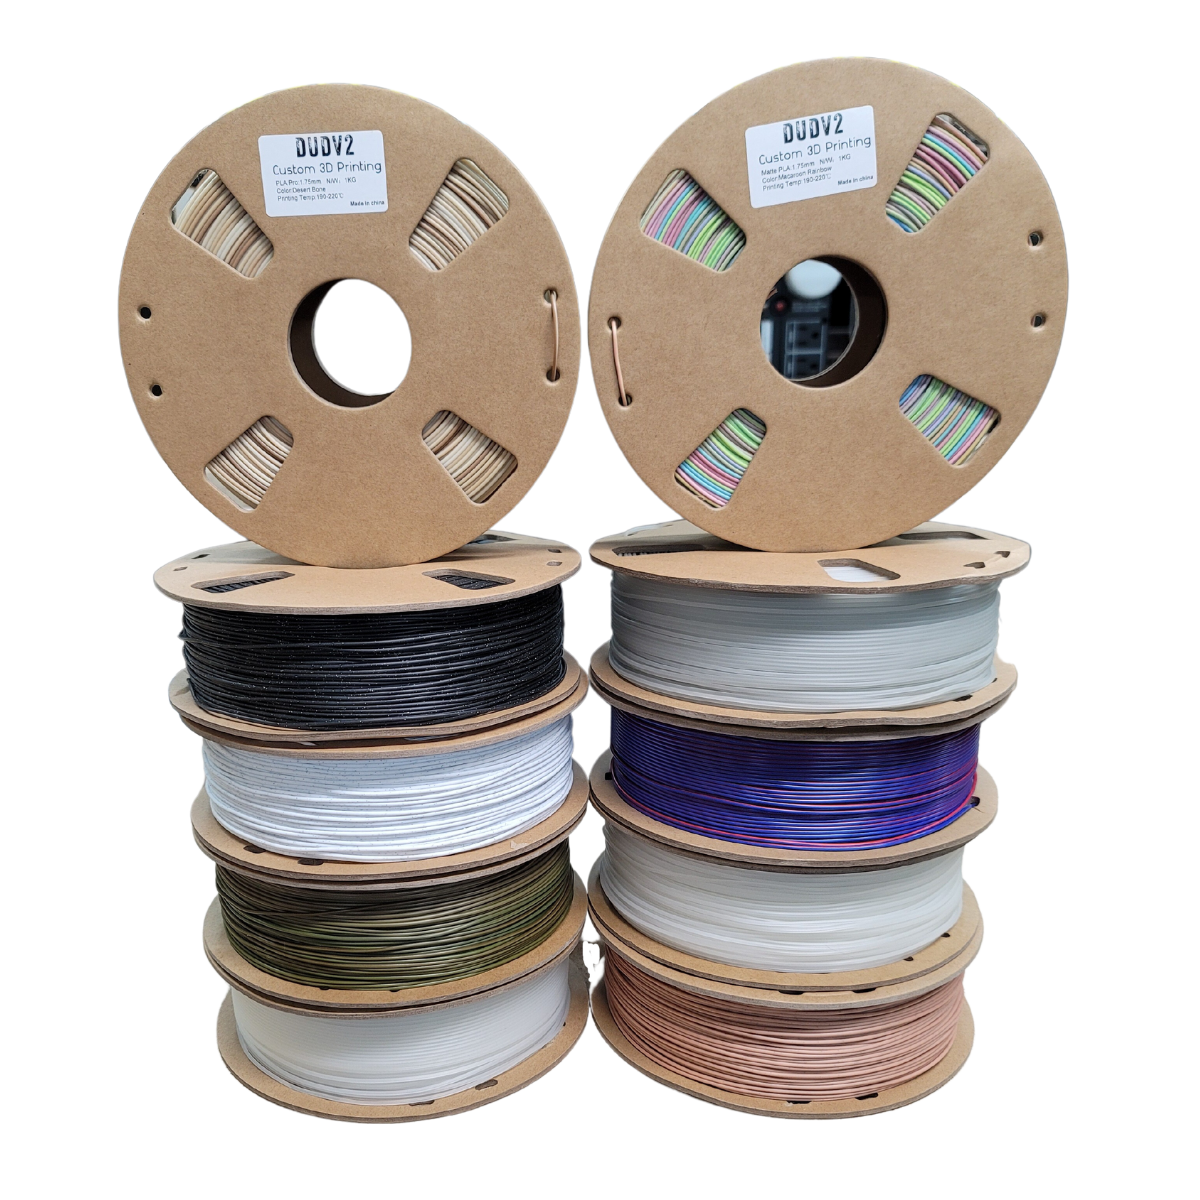 Mix & Match 10 Pack. Pick any 10 Filaments and Save!